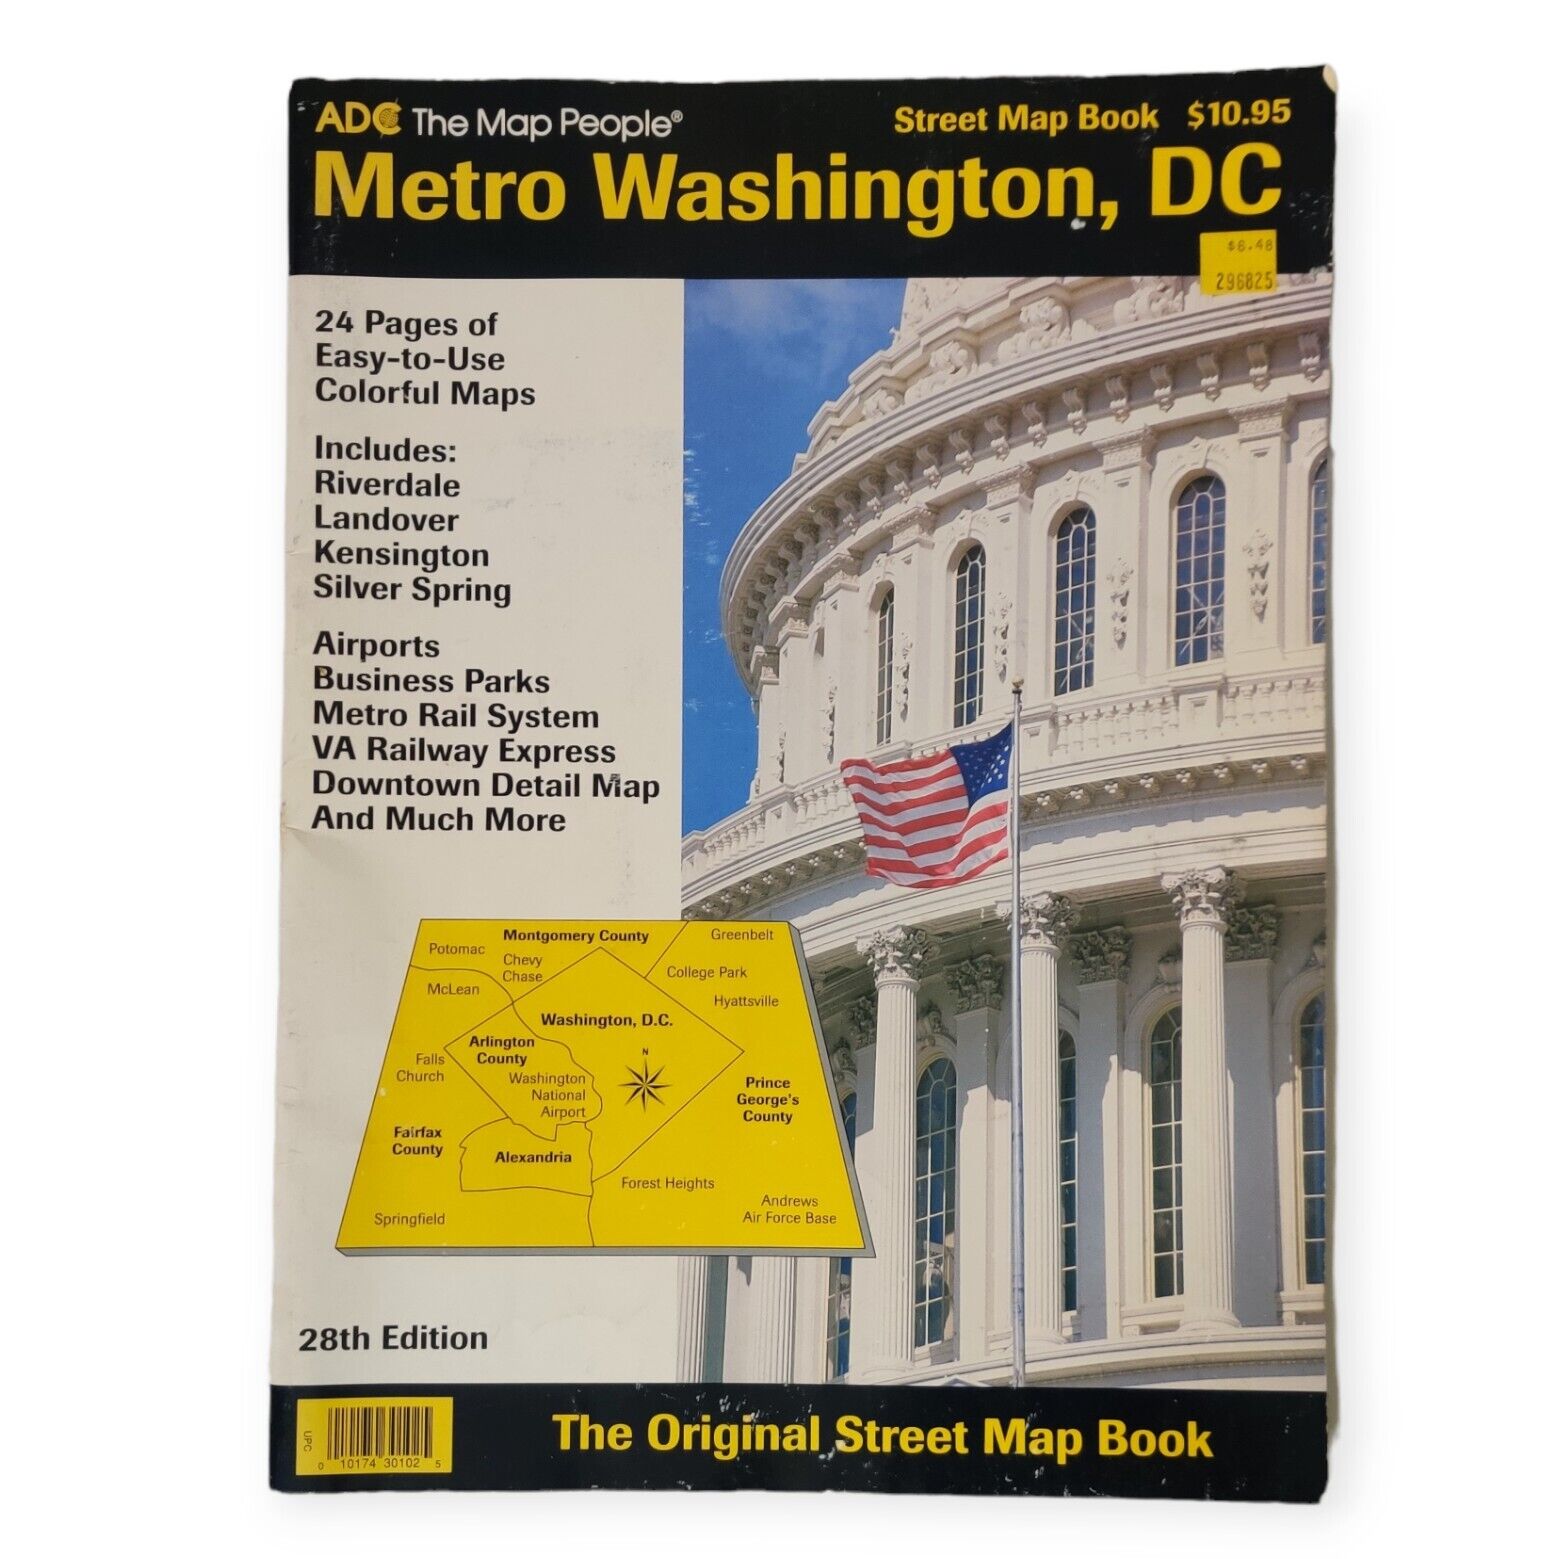 Metro Washington, DC Street Map Book ADC The Map People 28th Edition 1996